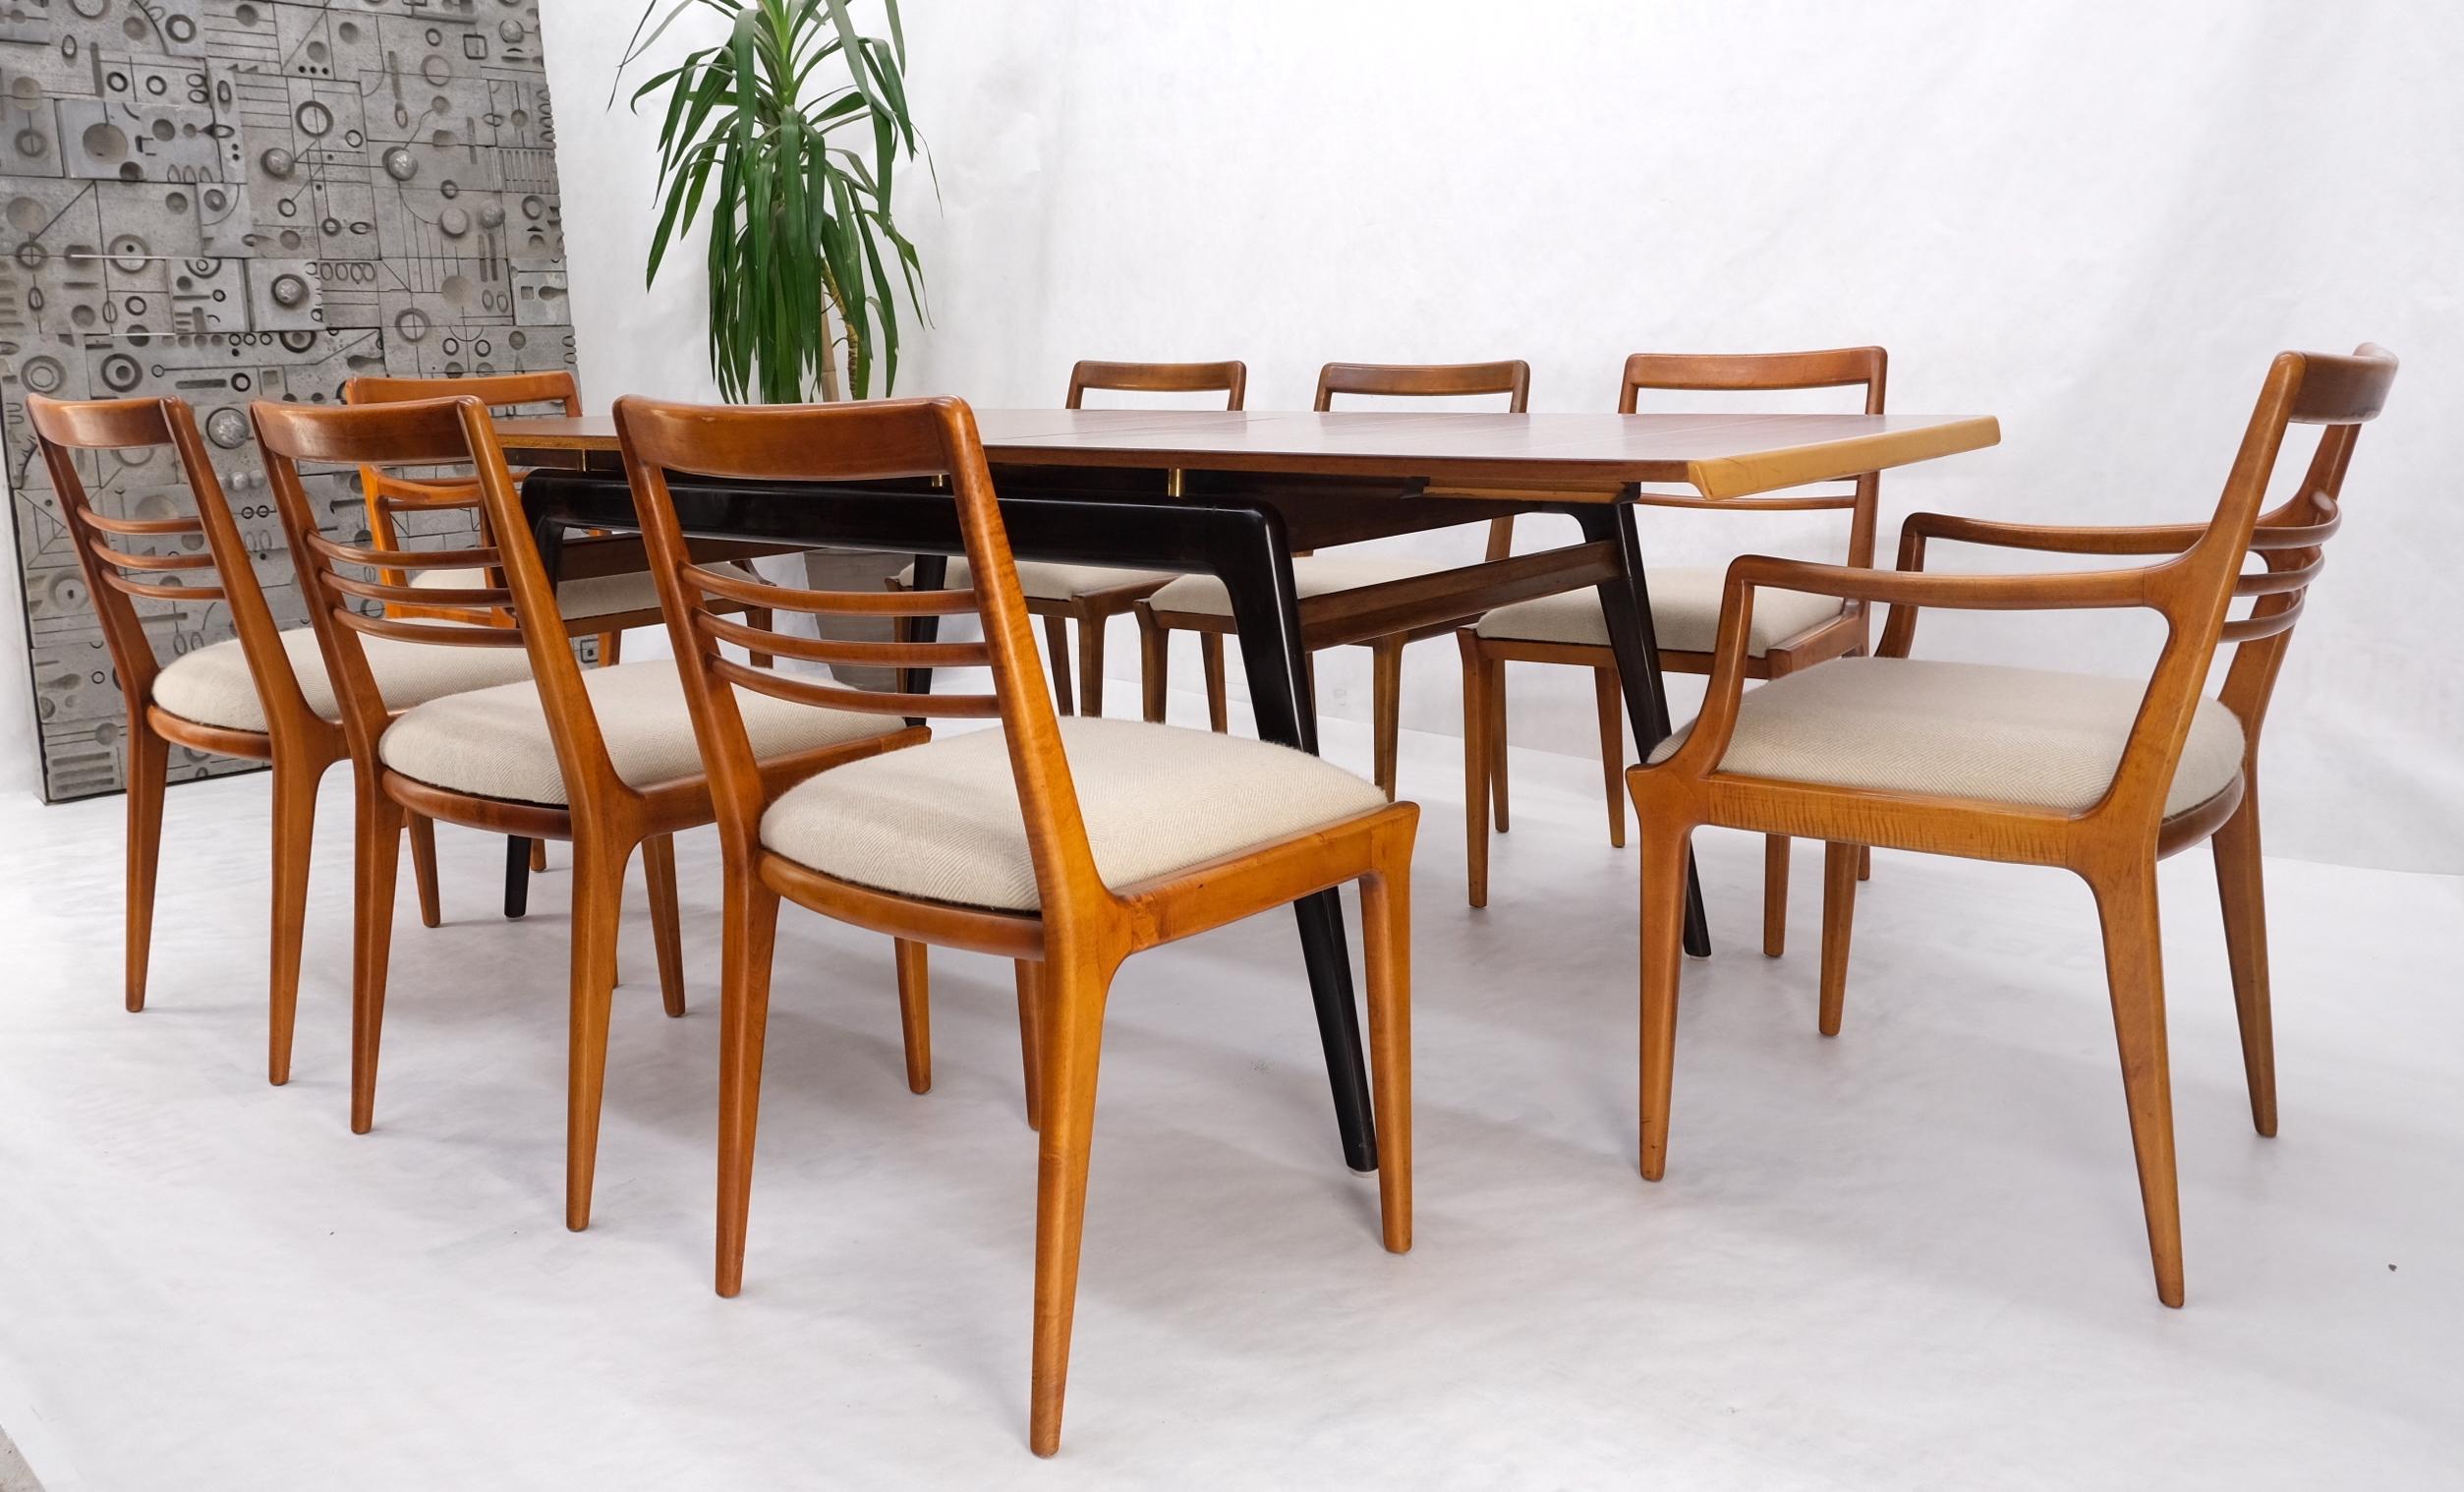 Italian Mid-Century Modern Dining Table 8 Chairs Set New Linen Upholstery Seats For Sale 11